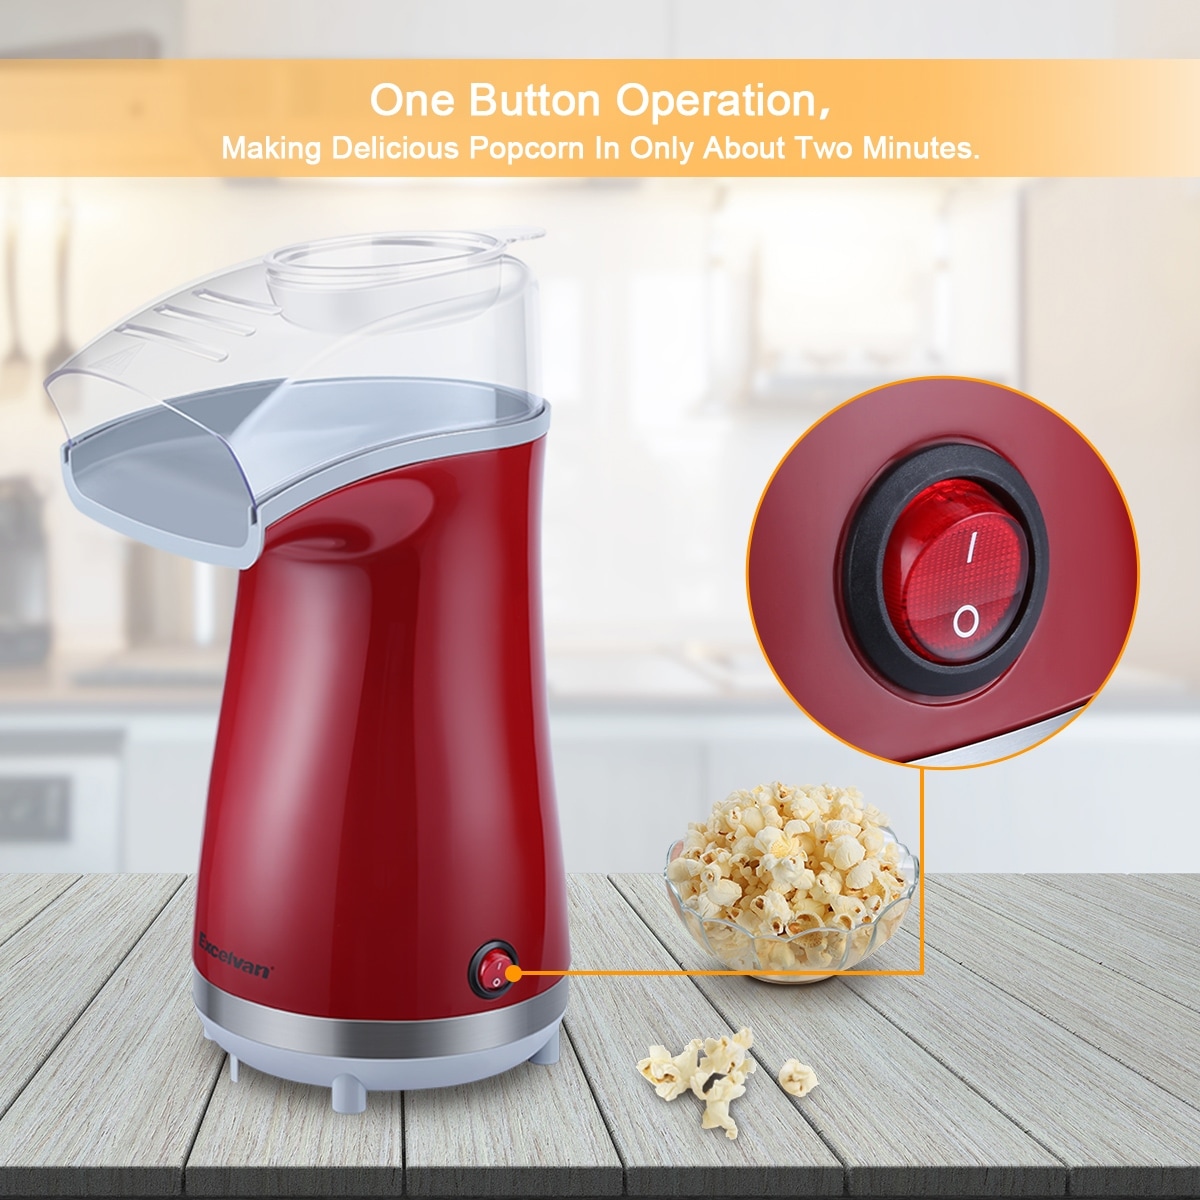 https://ak1.ostkcdn.com/images/products/is/images/direct/6e6d84055003259b74c536d9dce89074ab8ad8dc/Excelvan-Air-pop-Popcorn-Maker-Makes-16-Cups-of-Popcorn%2C-Includes-Measuring-Cup-and-Removable-Lid.jpg